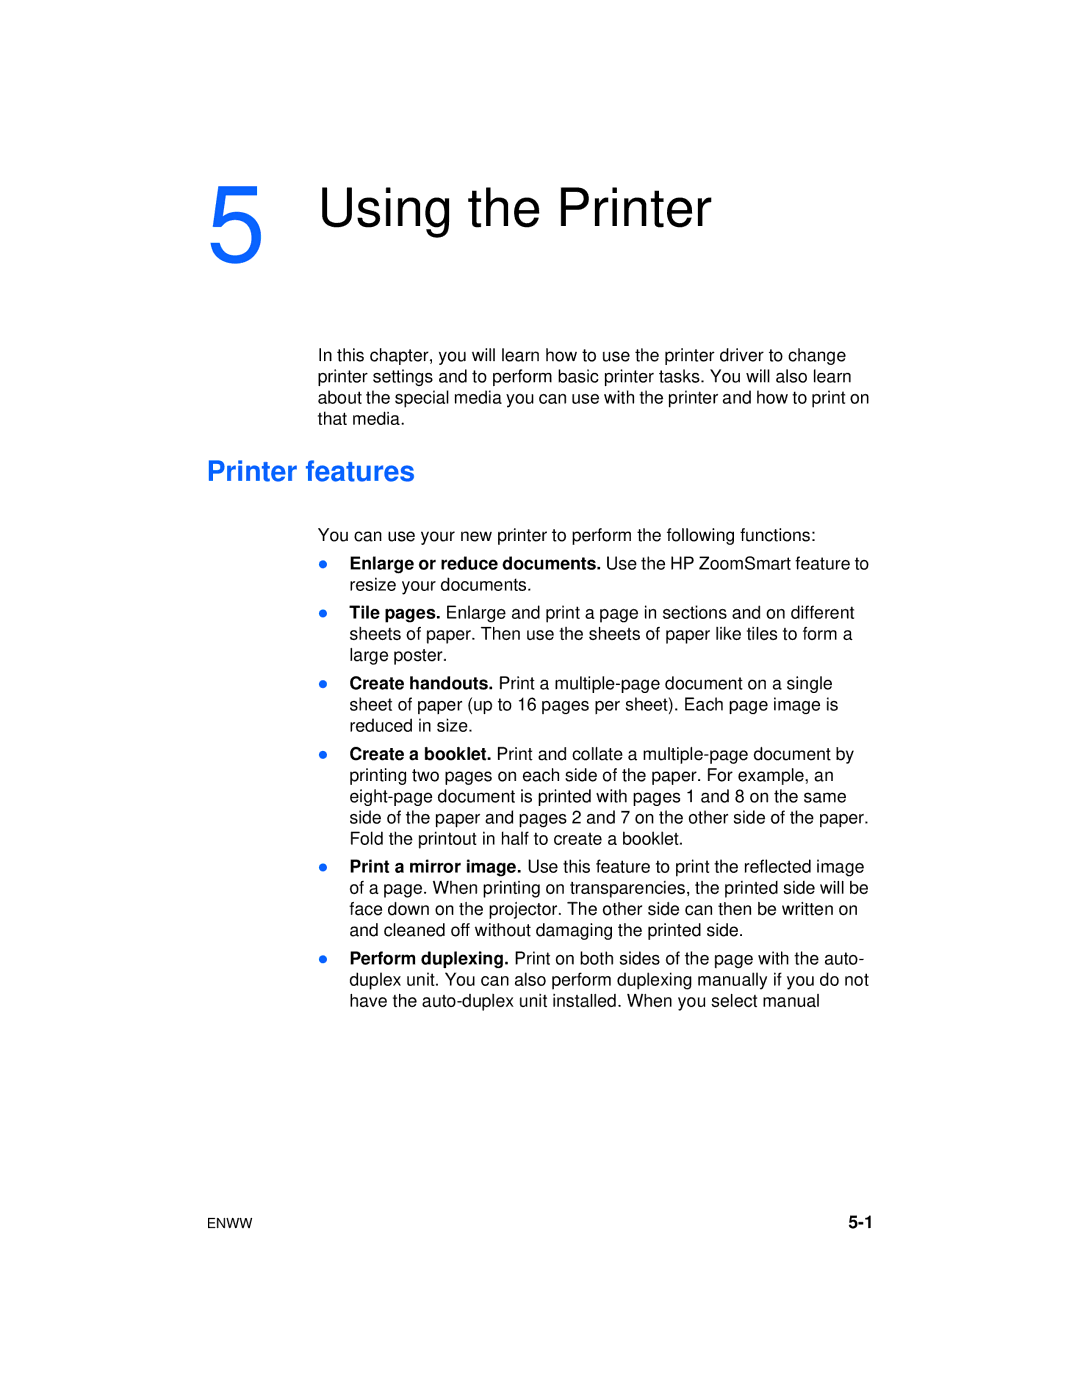 HP Color Inkjet cp1700 manual Using the Printer, Printer features 